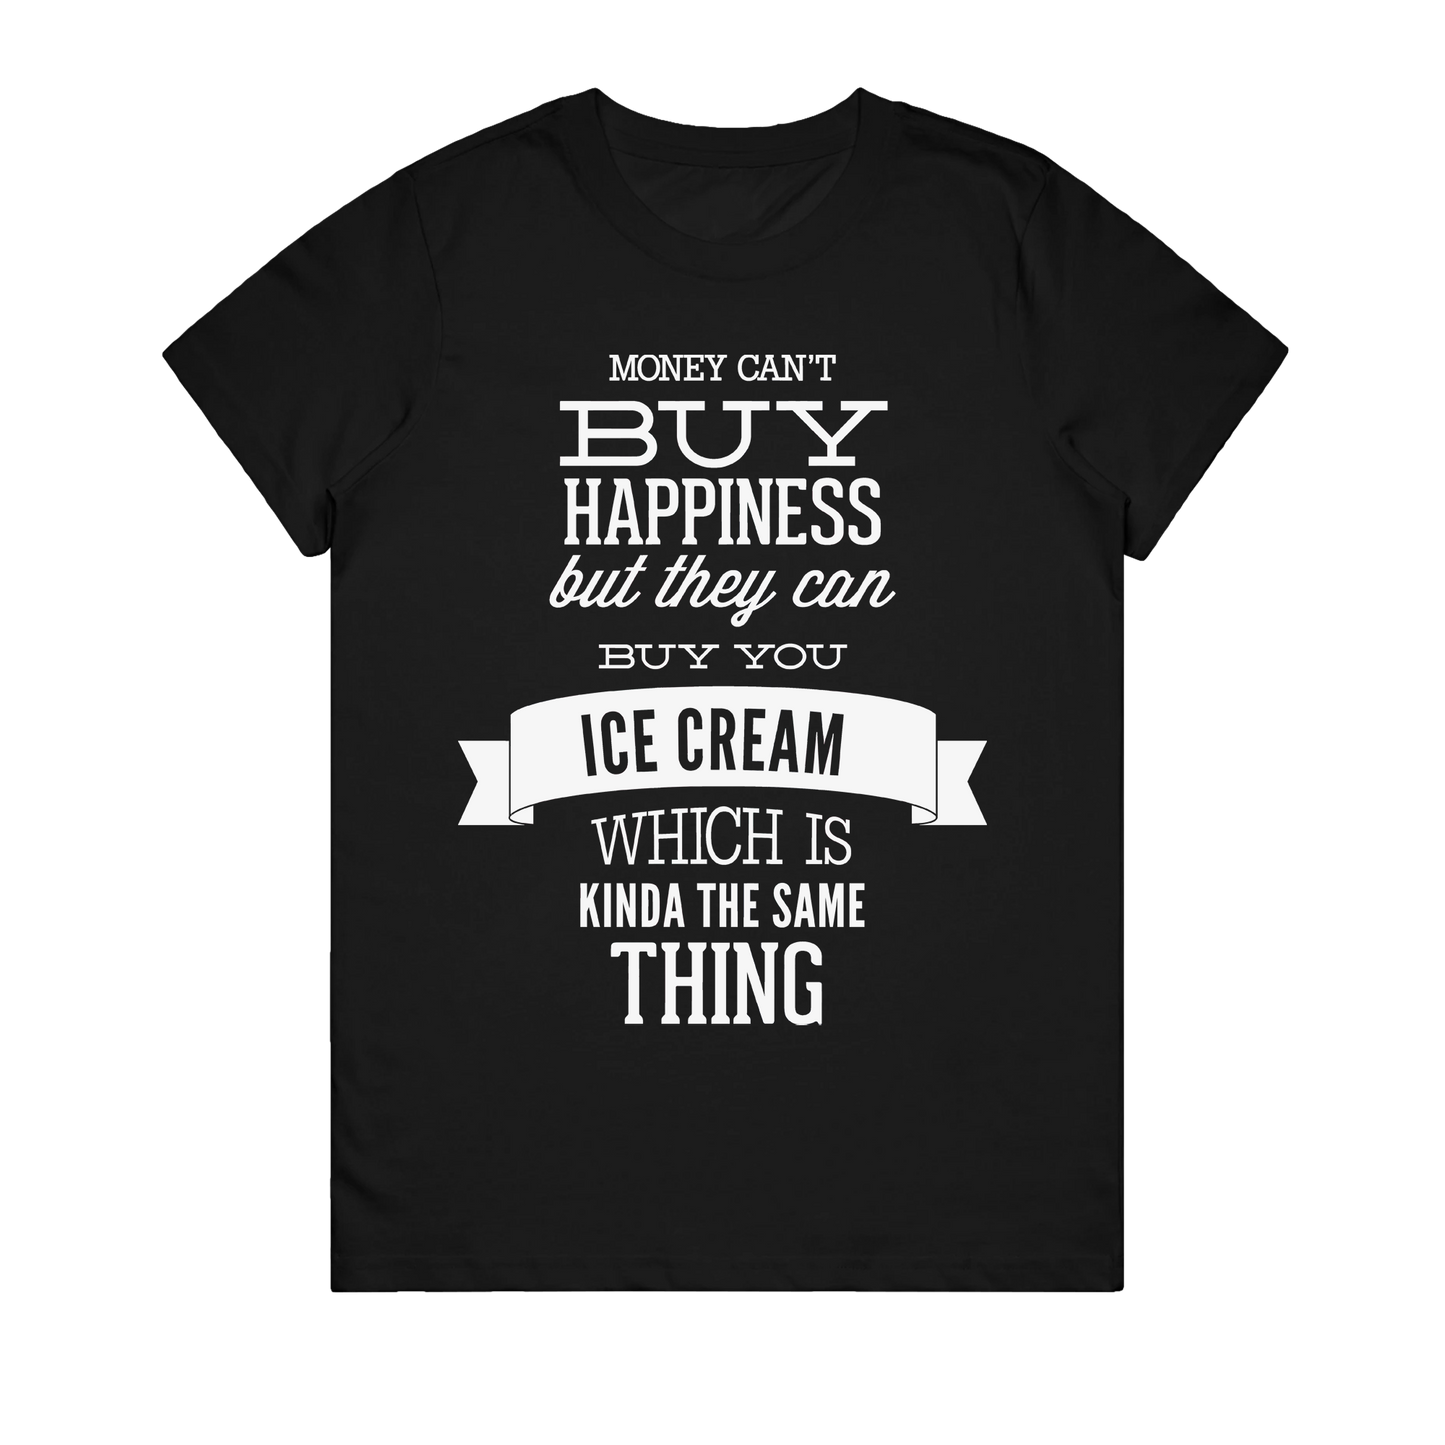 Women's T-Shirt - Money Cant But Happiness